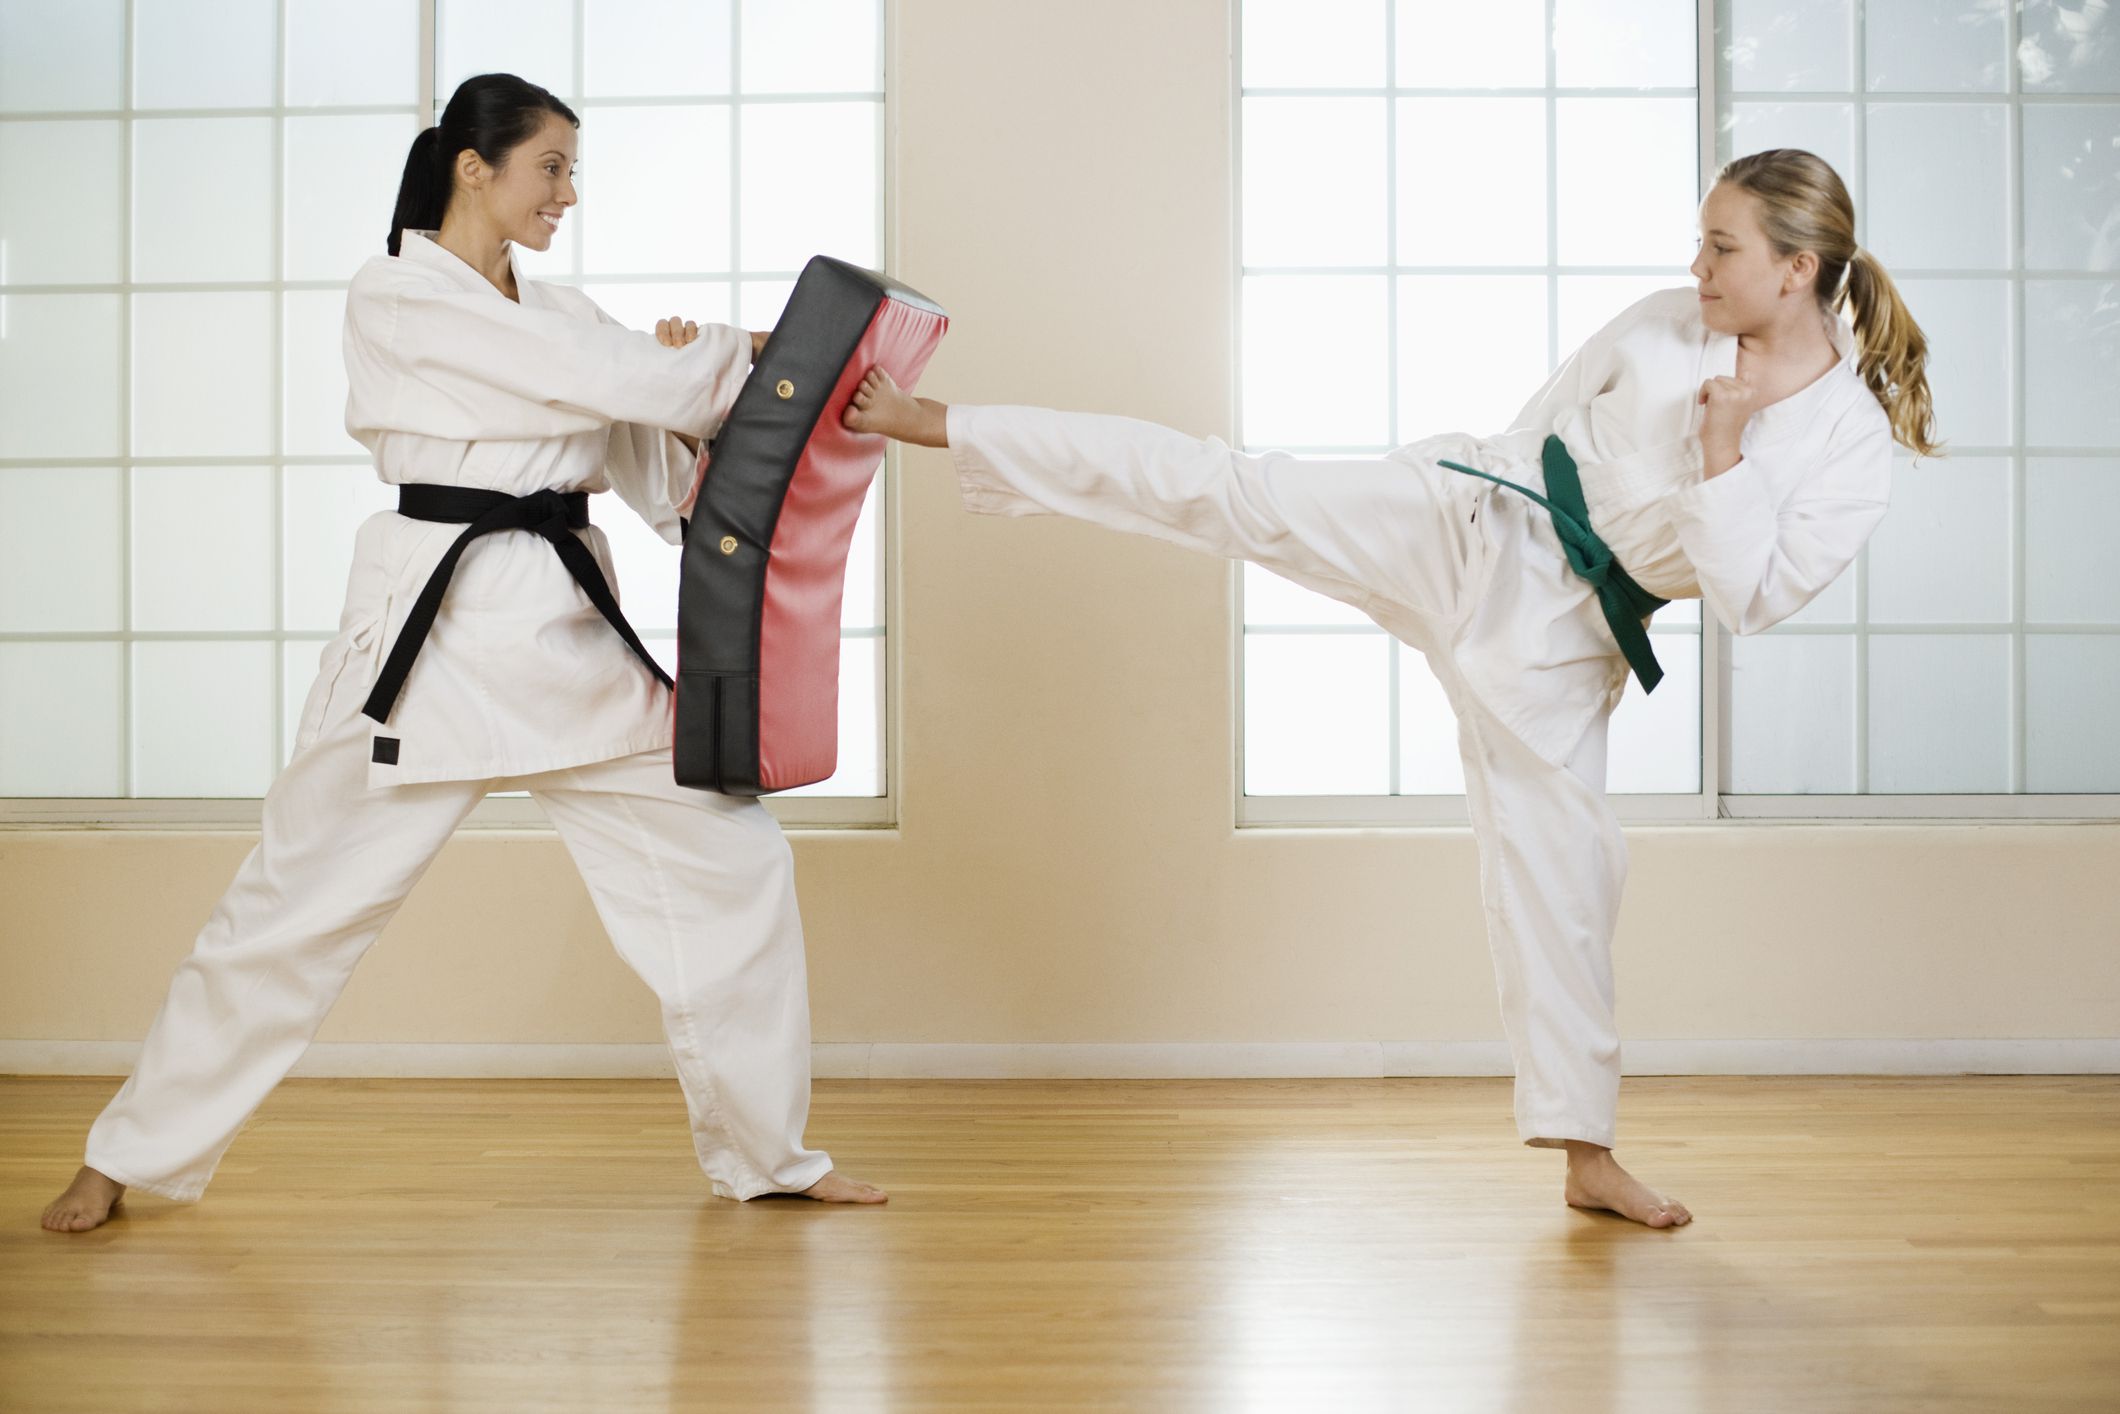 A woman with a green belt in karate kicking a bag while another woman with a black belt holds it